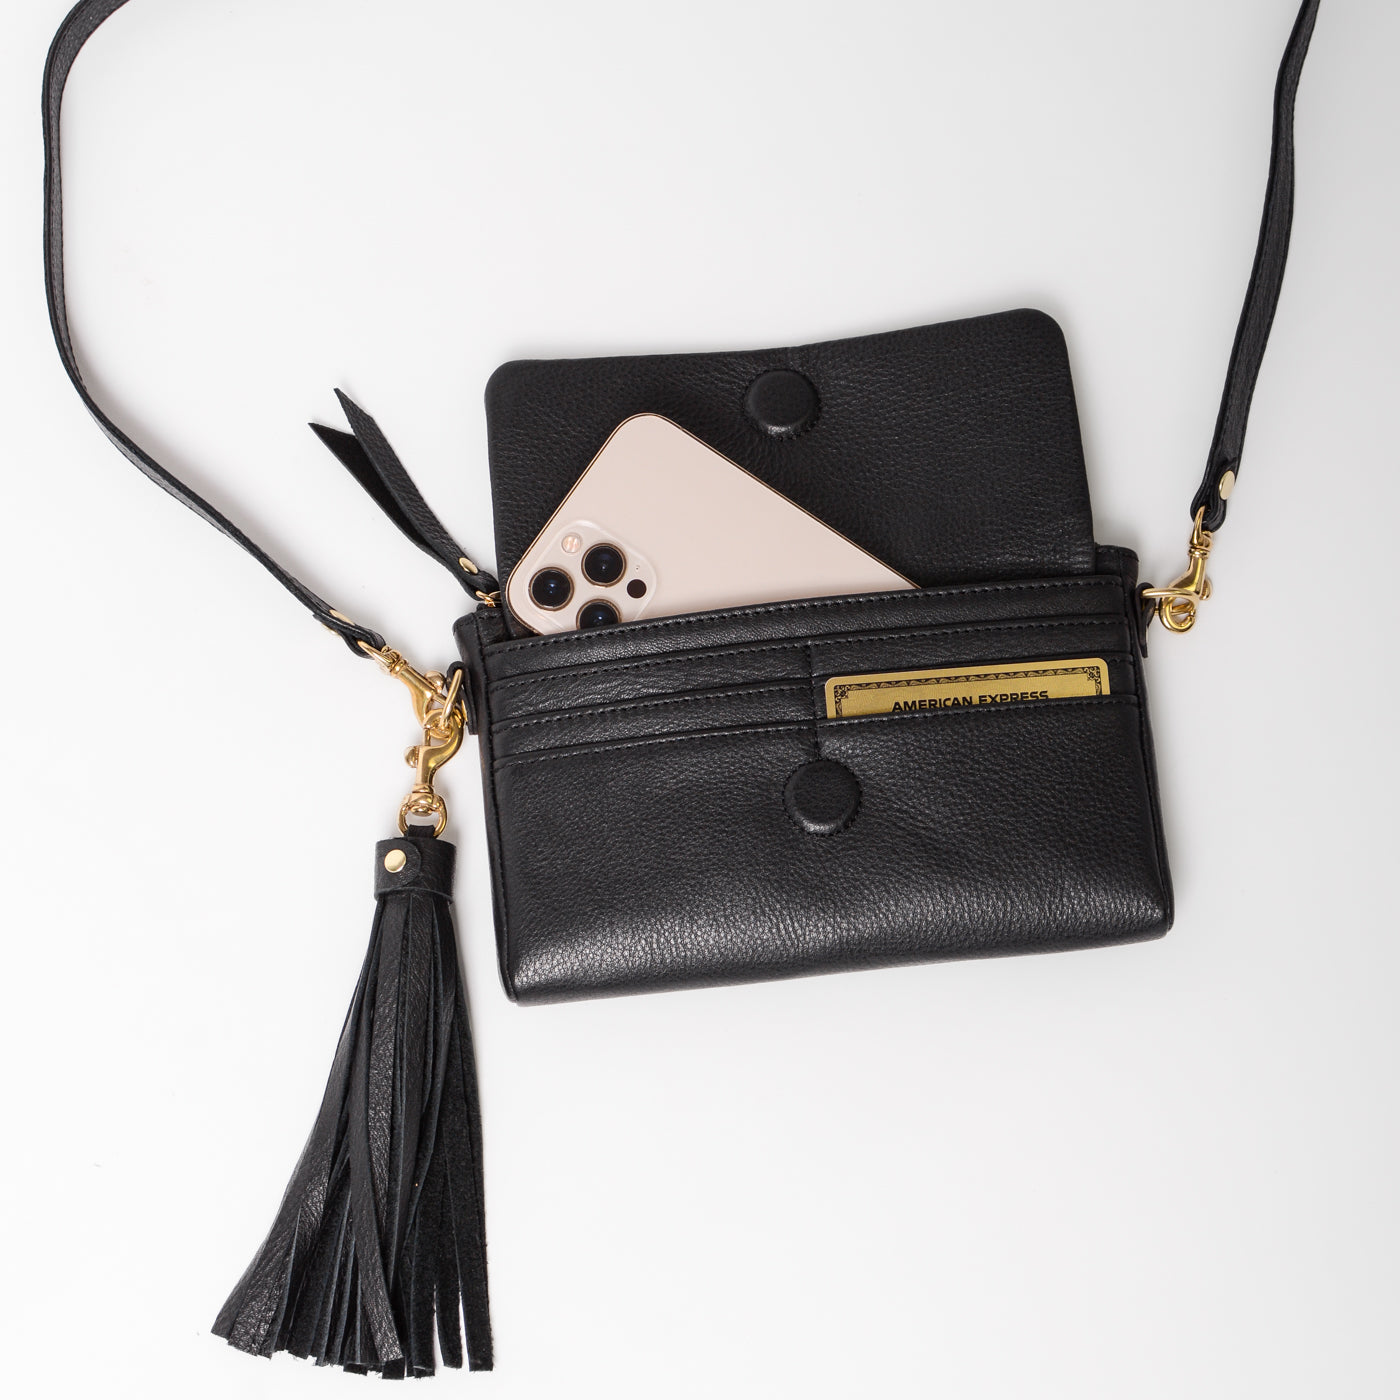 Black and Friday Deals 50% Off Clear! asdoklhq Clearance Bags Under $5.00,  Women's Solid Cover Tassels Cross Body Shoulder Telephone Coin Bag -  Walmart.com